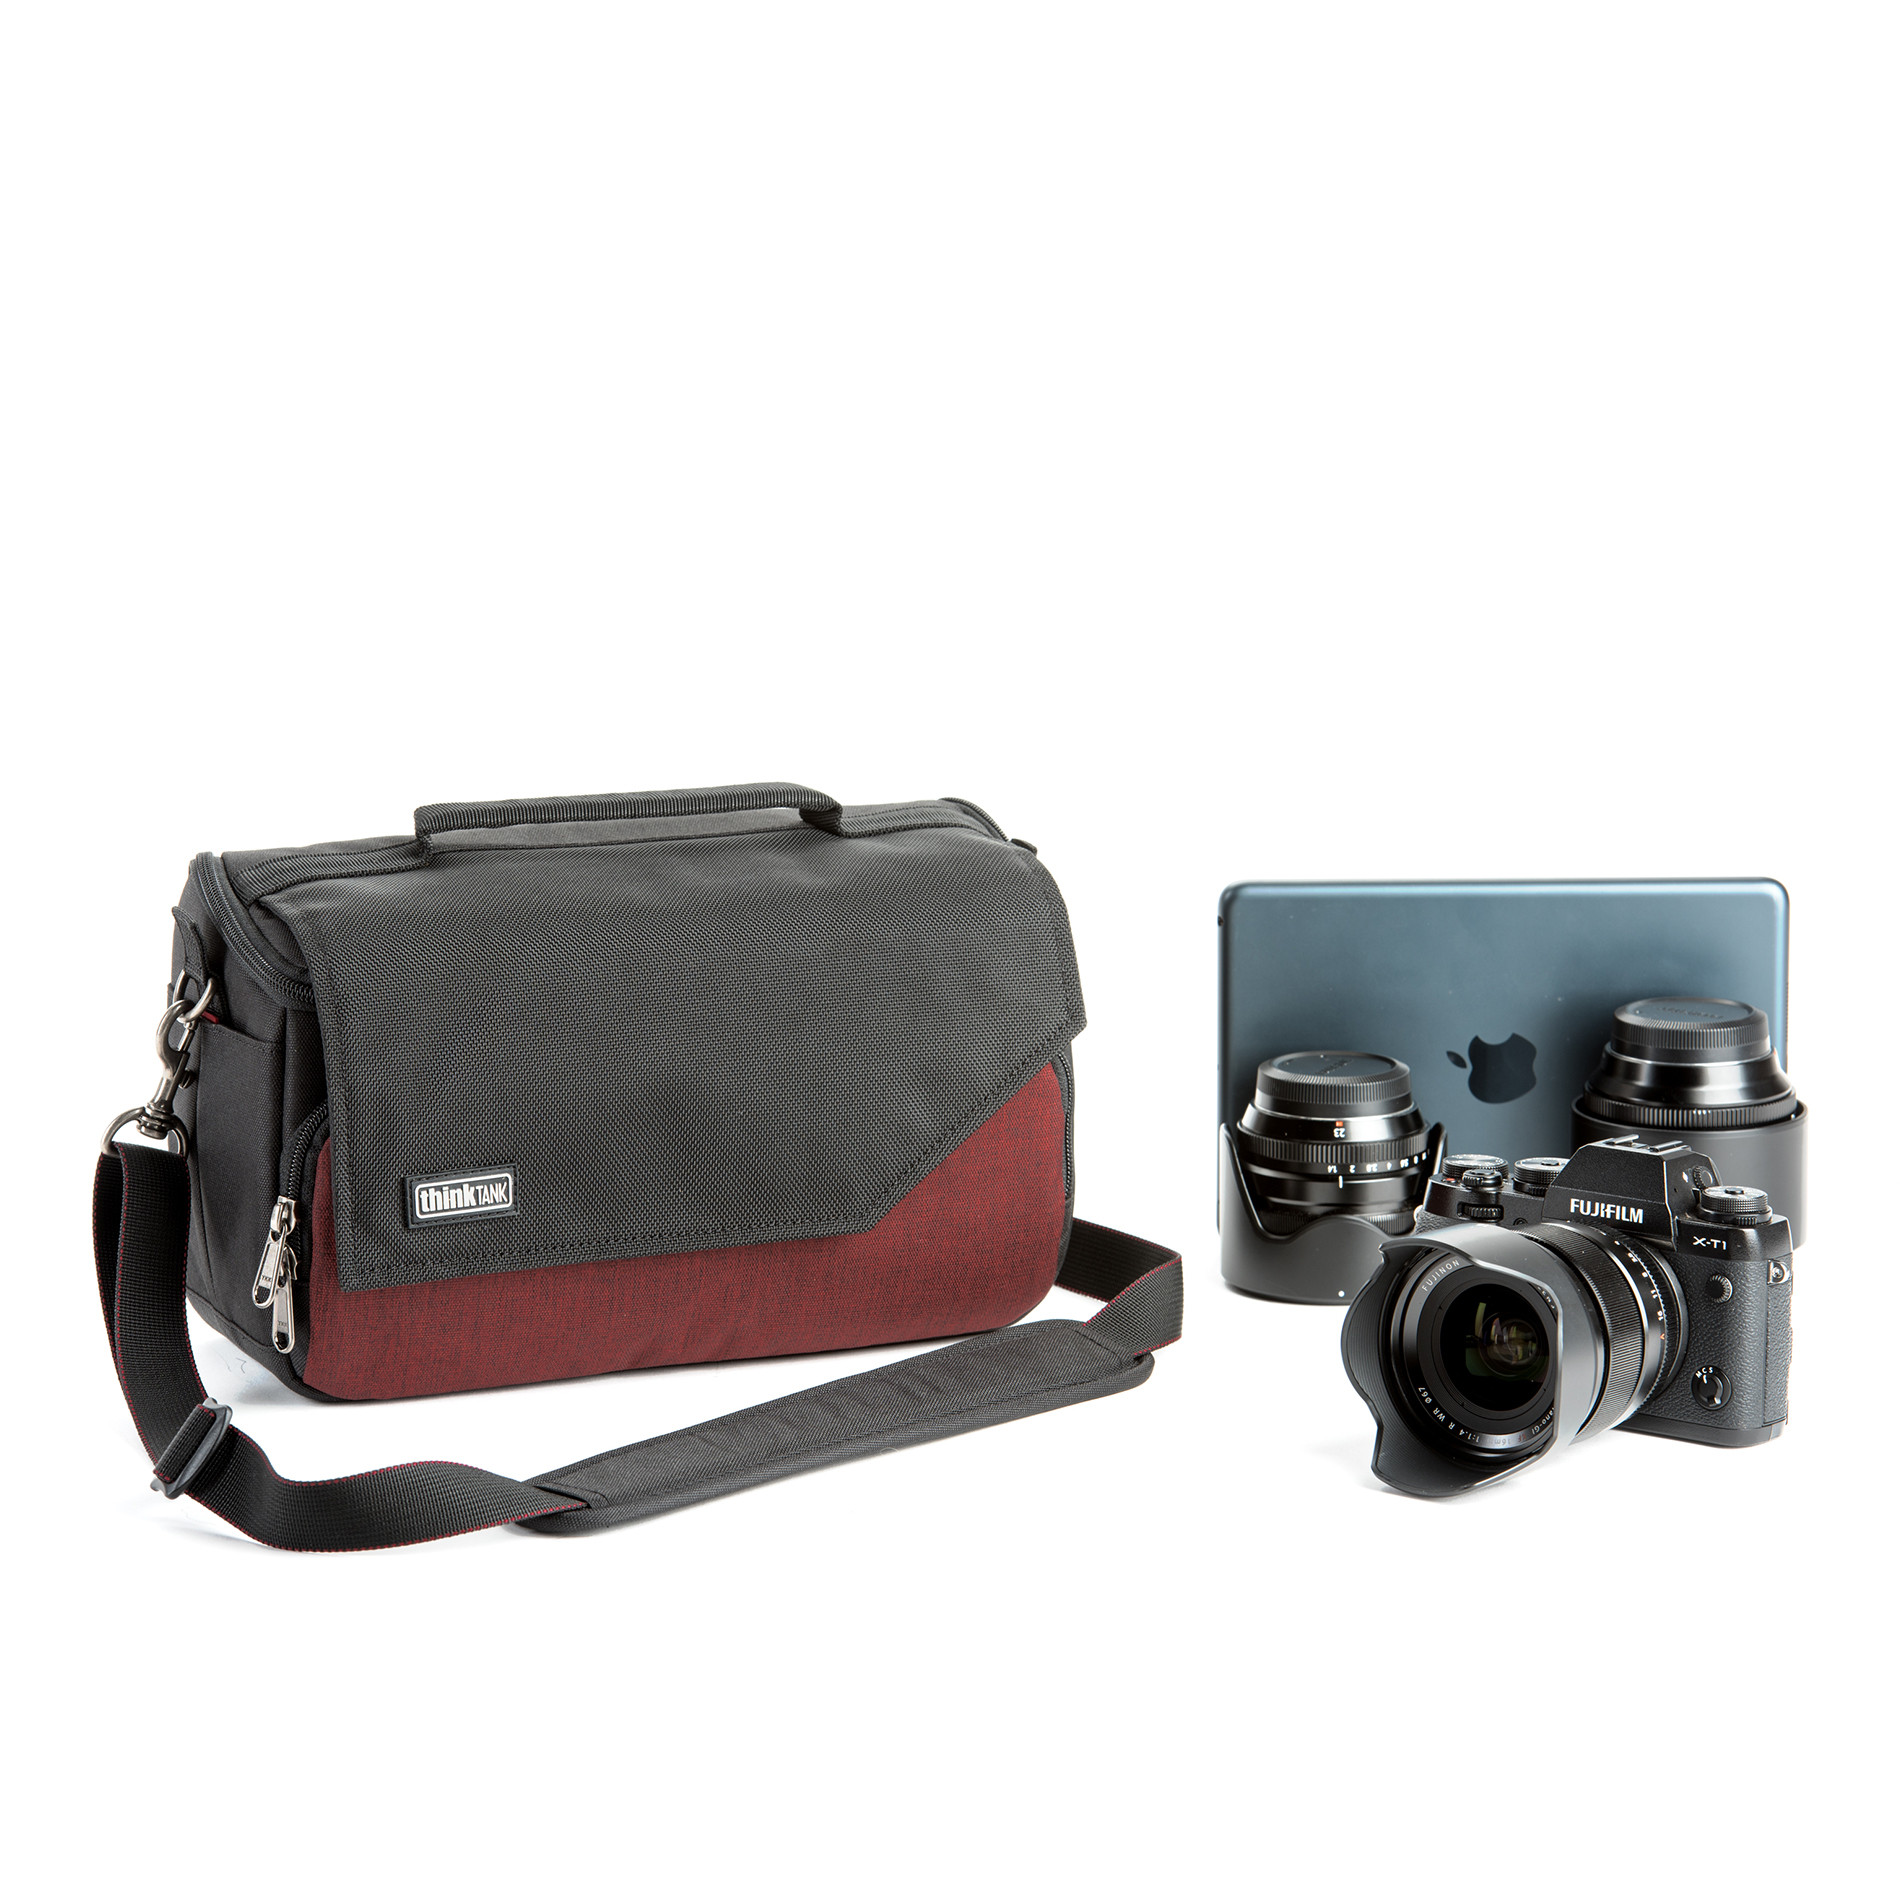 THINK TANK MIRRORLESS MOVER 25i deep red